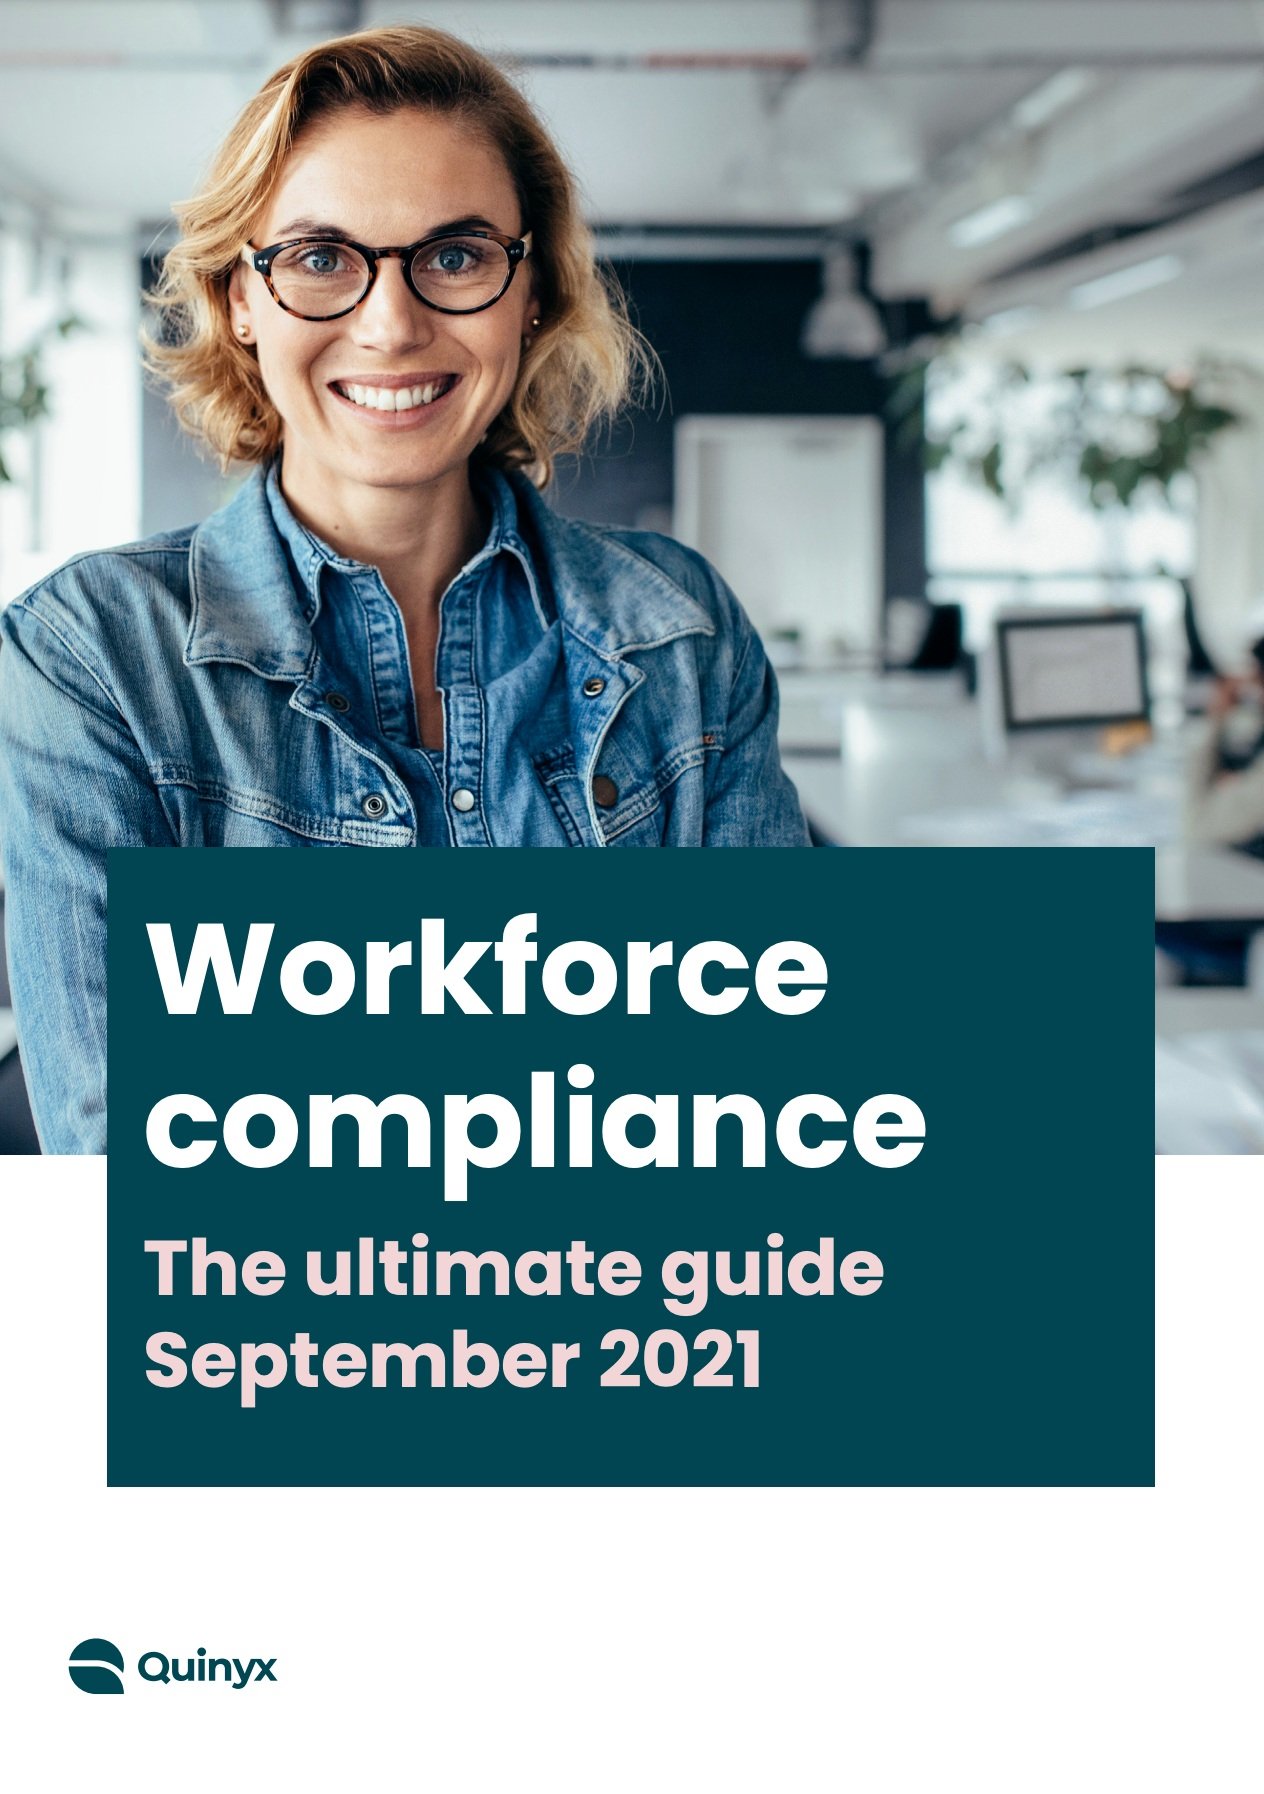 Workforce Compliance The ultimate guide September 2021